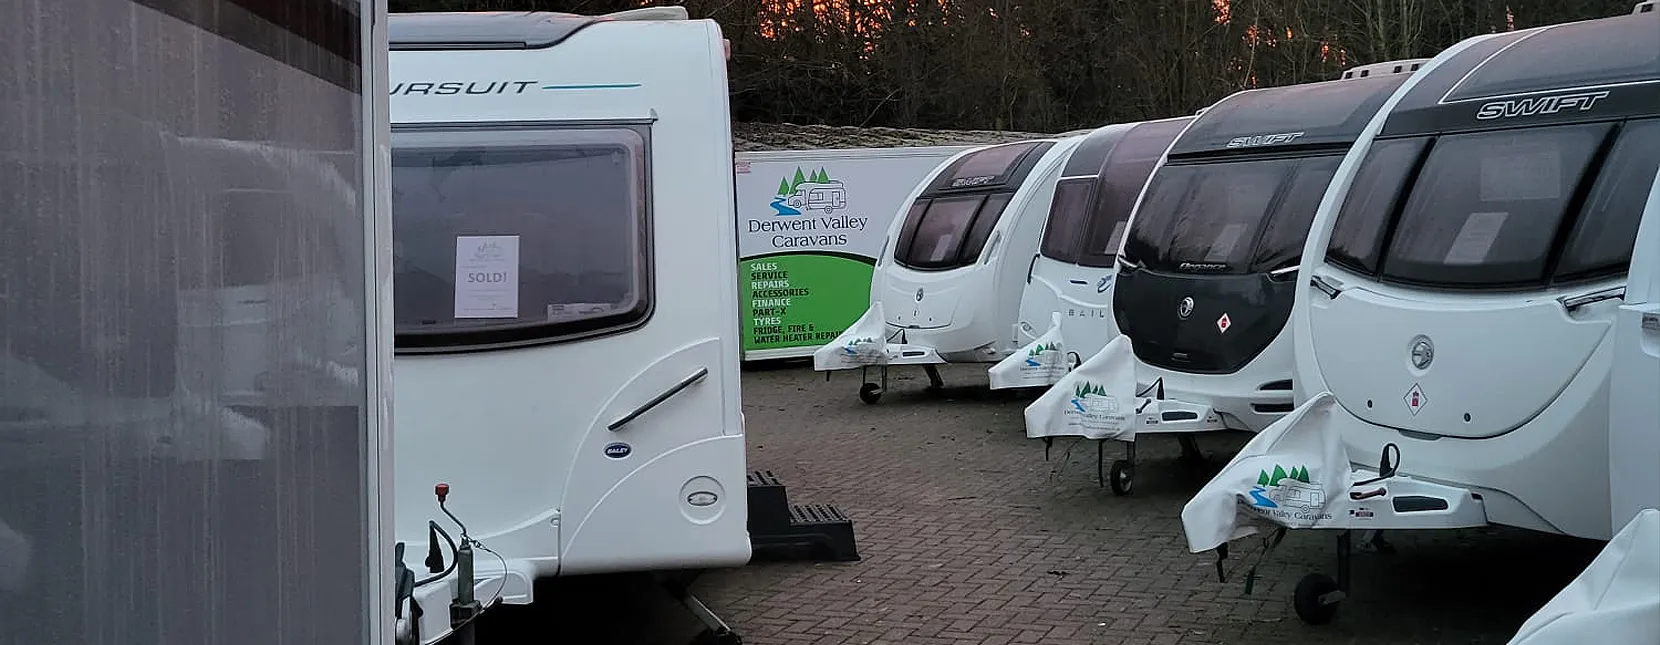 Caravans for sale in dealership yard photograph taken at dusk time for beautiful effect